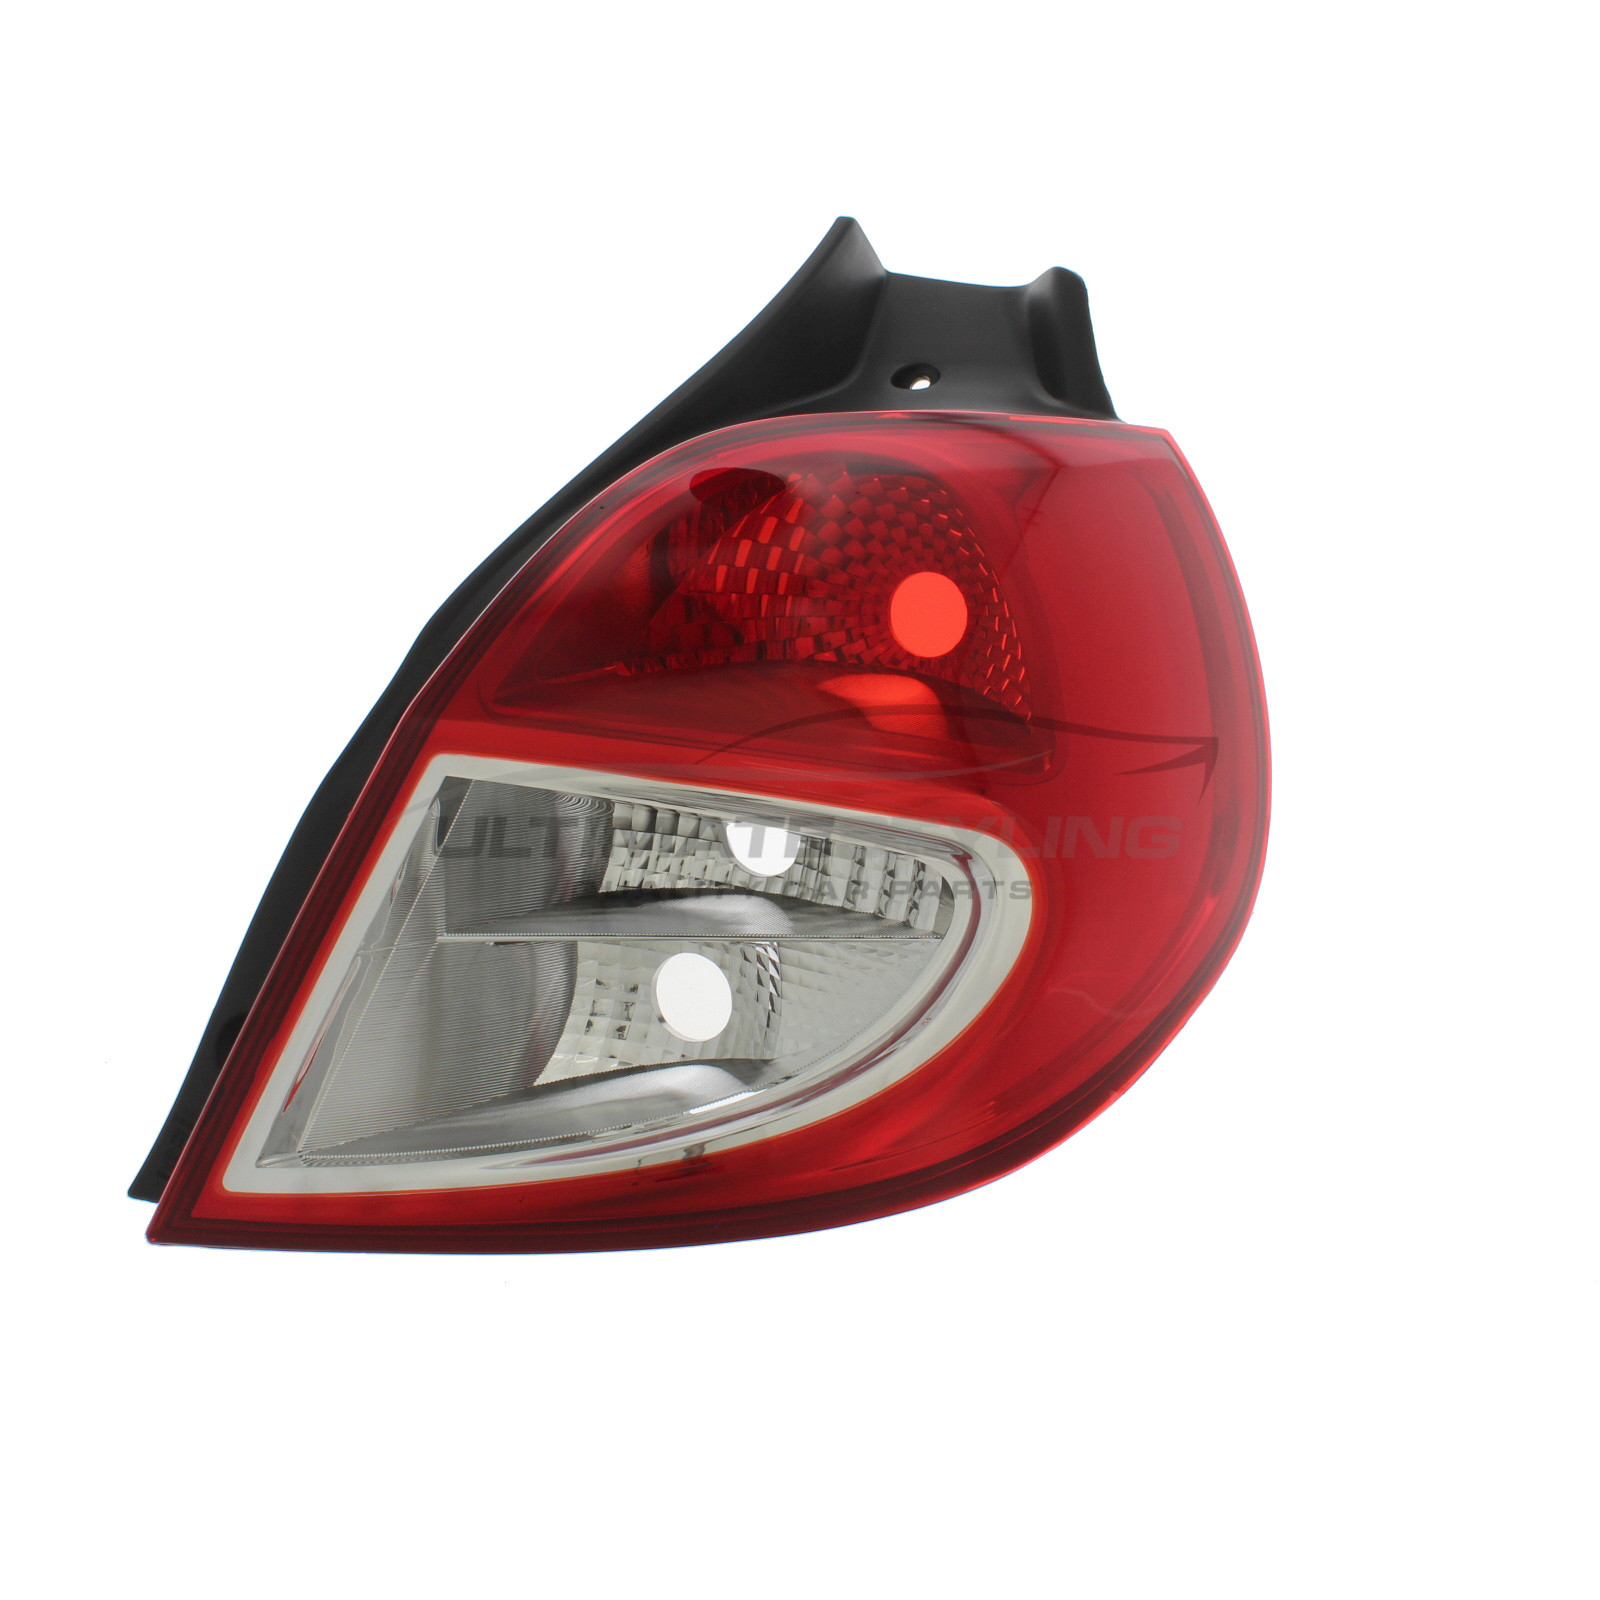 Renault Clio 2009-2013 Non-LED Rear Light / Tail Light Excluding Bulb Holder Drivers Side (RH)